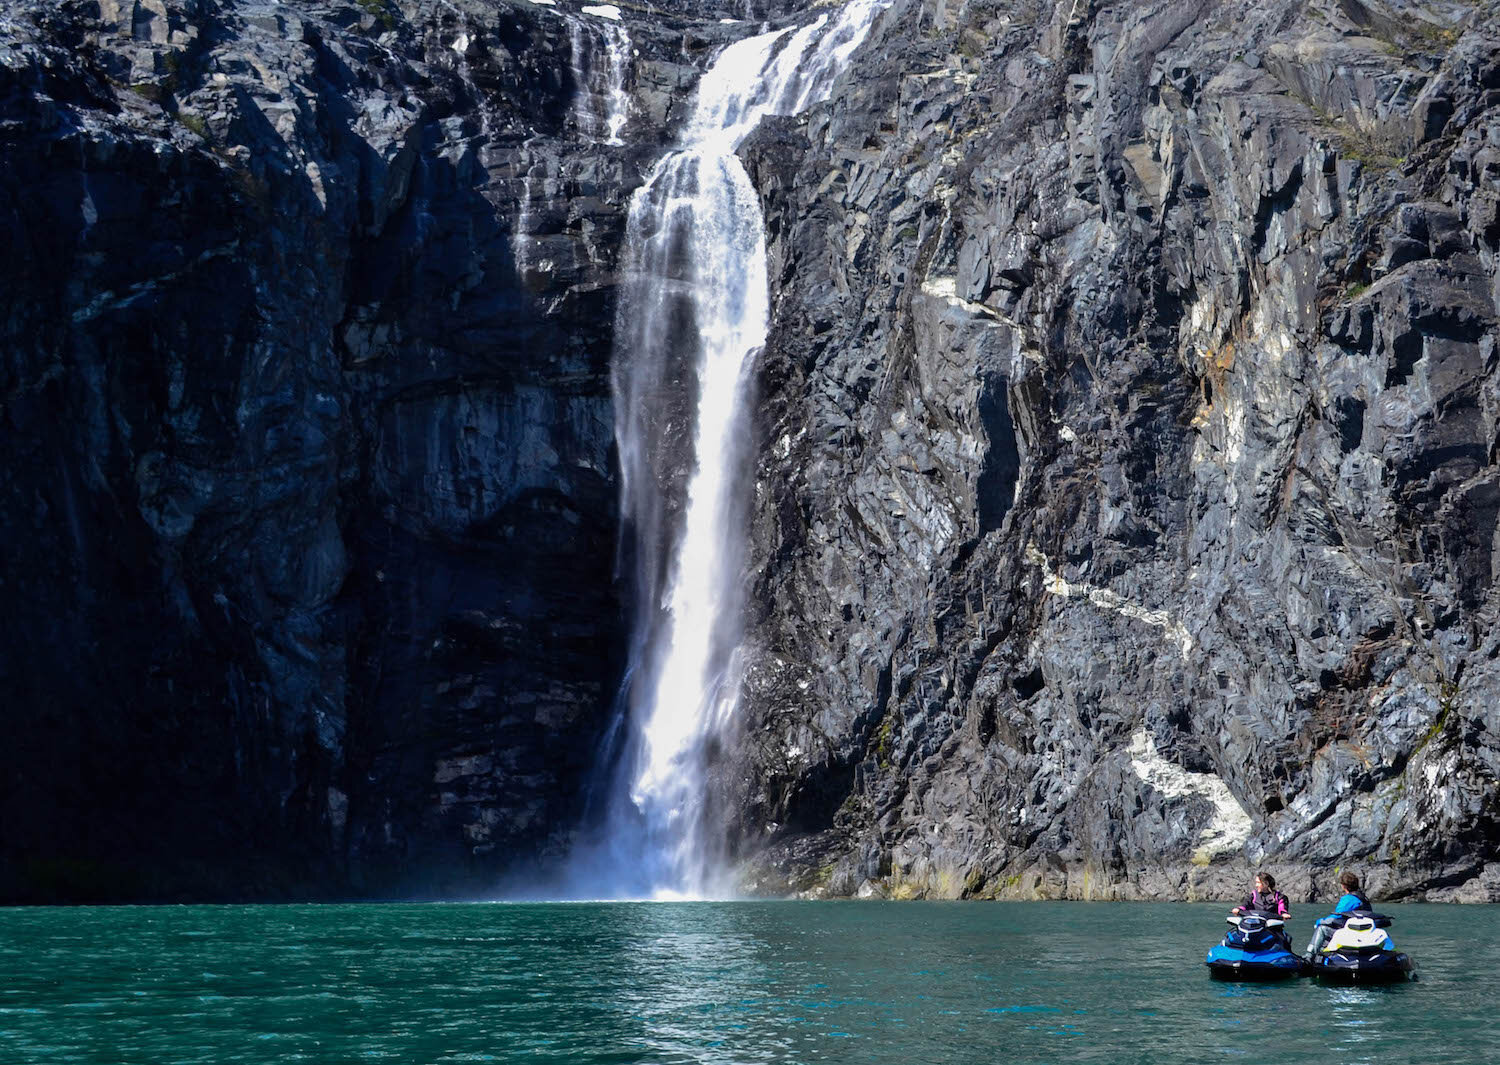  A jet skier next to a large waterfall with Alaska Wild Guides 